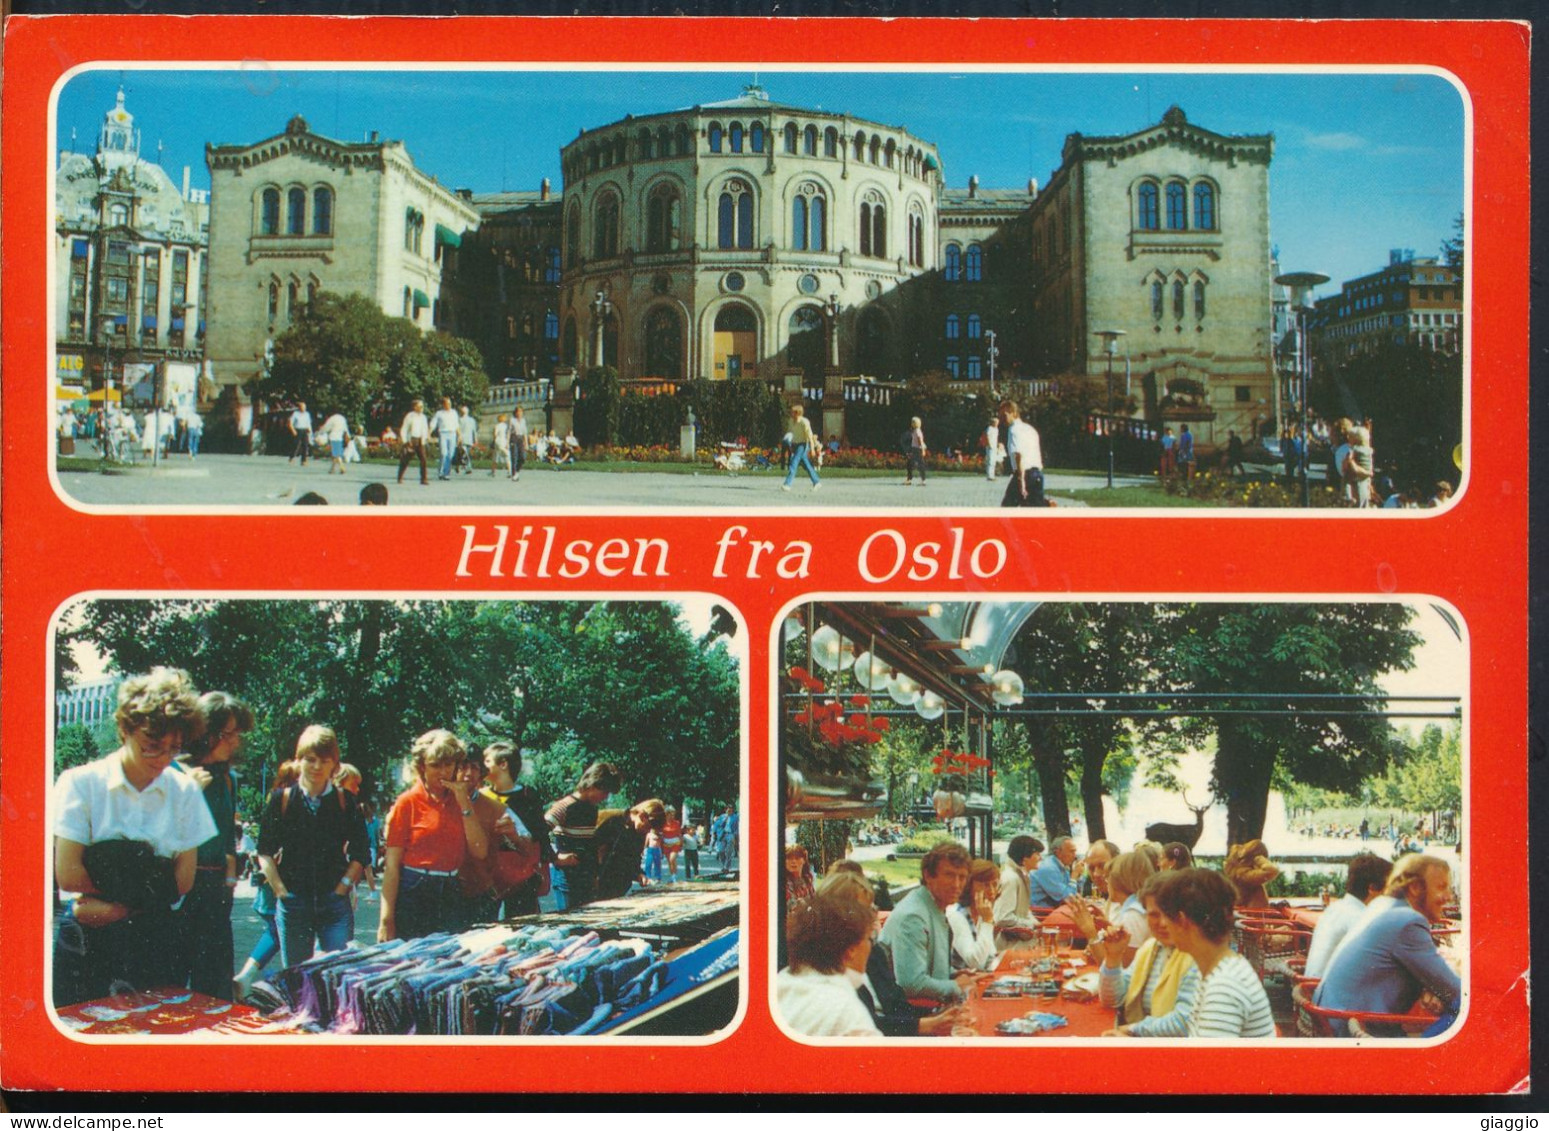 °°° 31010 - NORWAY - HILSEN FRA OSLO - 1982 With Stamps °°° - Noruega